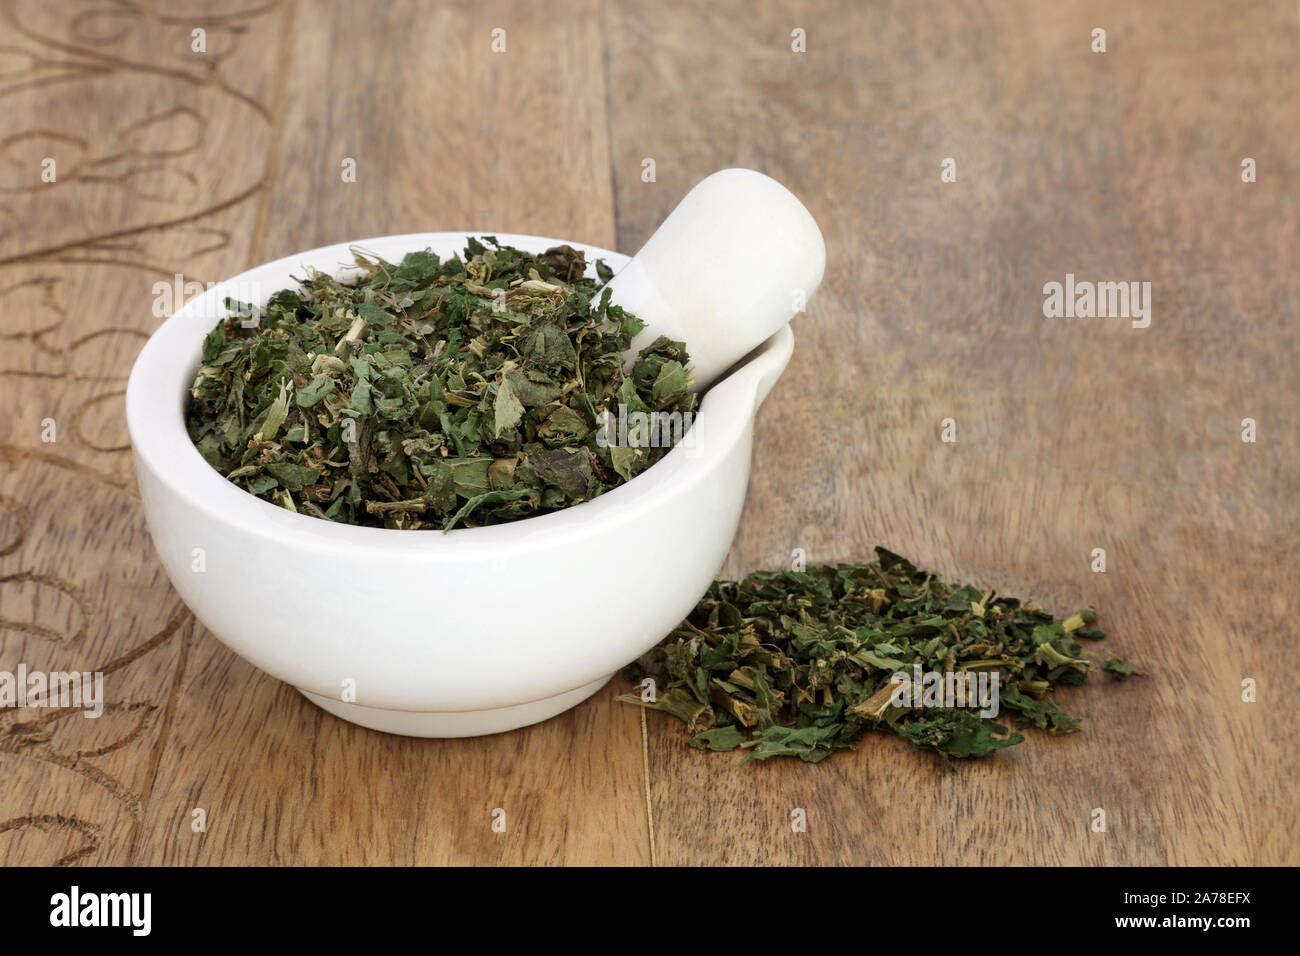 Pellitory of the wall herb leaf in a mortar with pestle used in herbal medicine to treat urinary infections, kidney pain & stones. Stock Photo